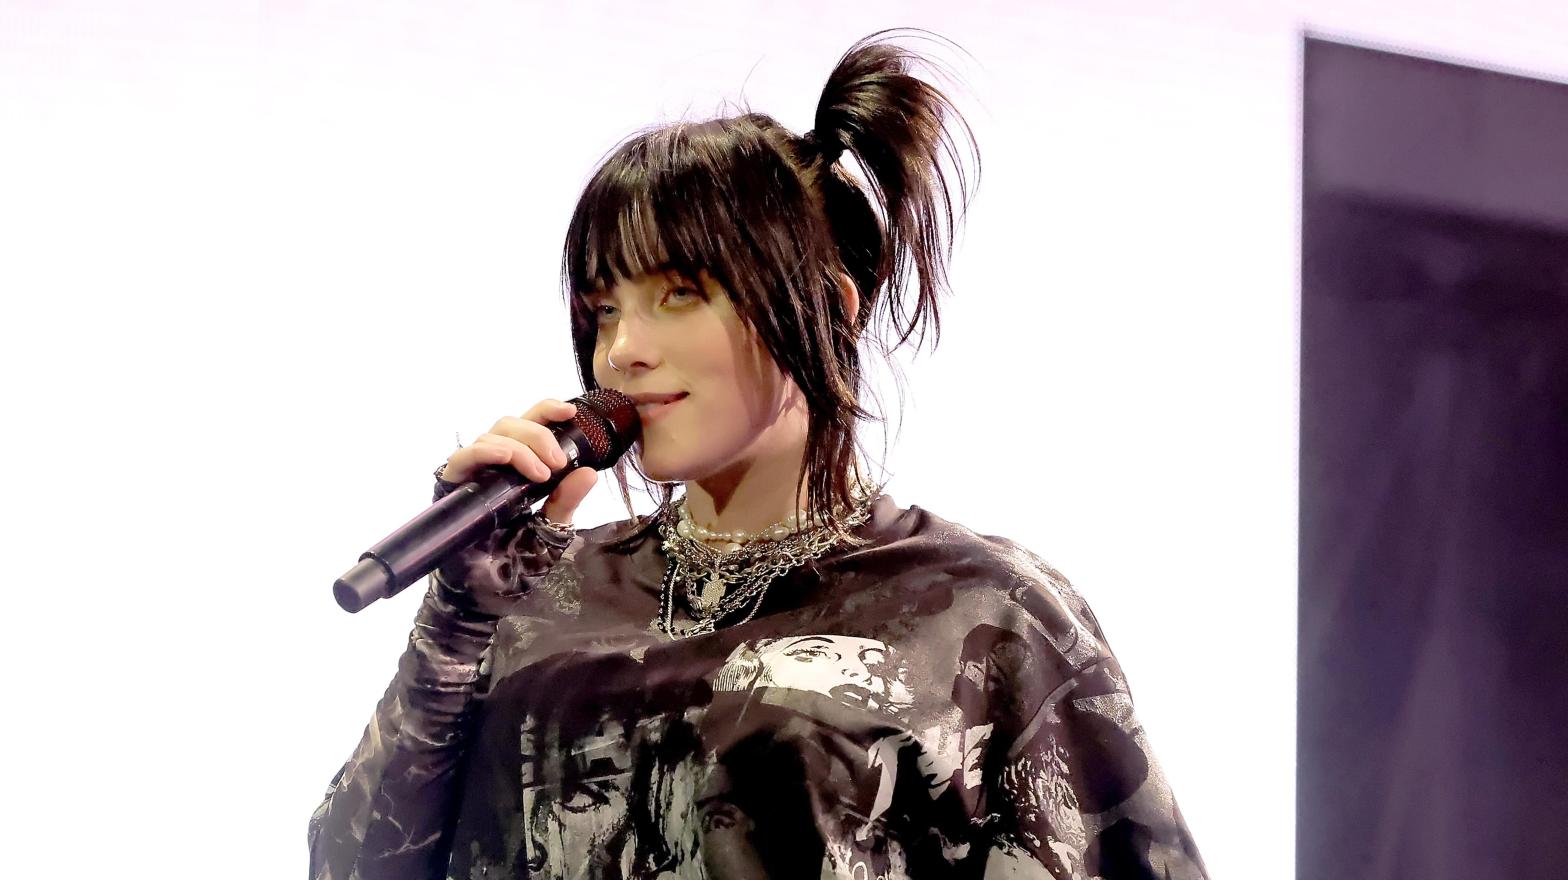 Billie Eilish headlined the 2022 Coachella Valley Music And Arts Festival. (Image: Amy Sussman, Getty Images)